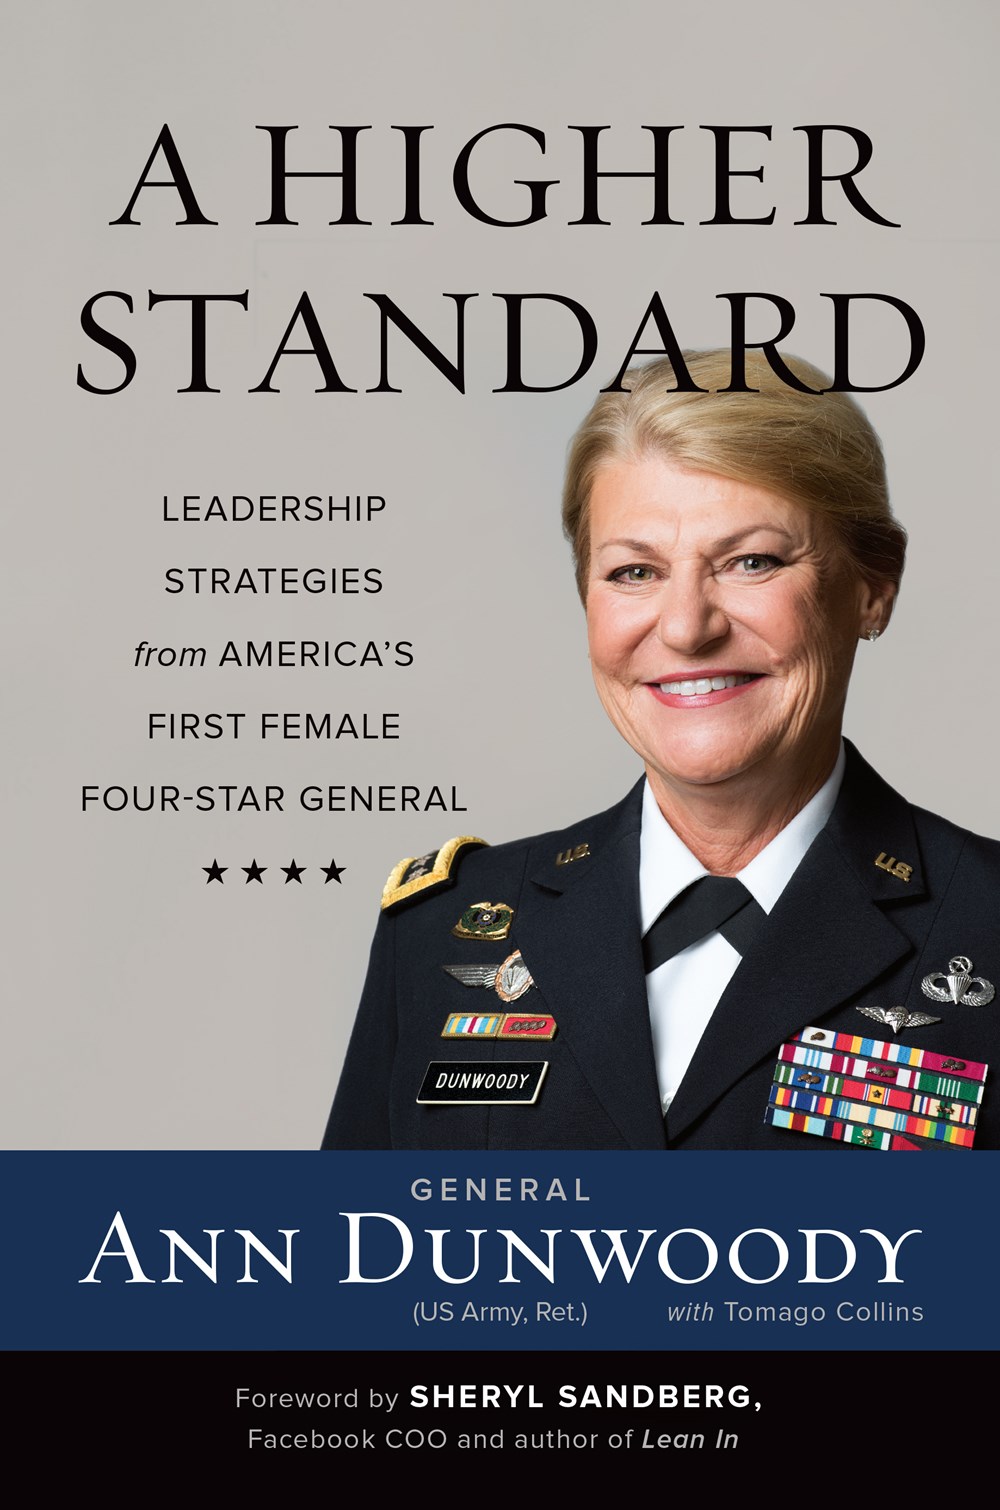 Higher Standard Leadership Strategies from America's First Female Four-Star General